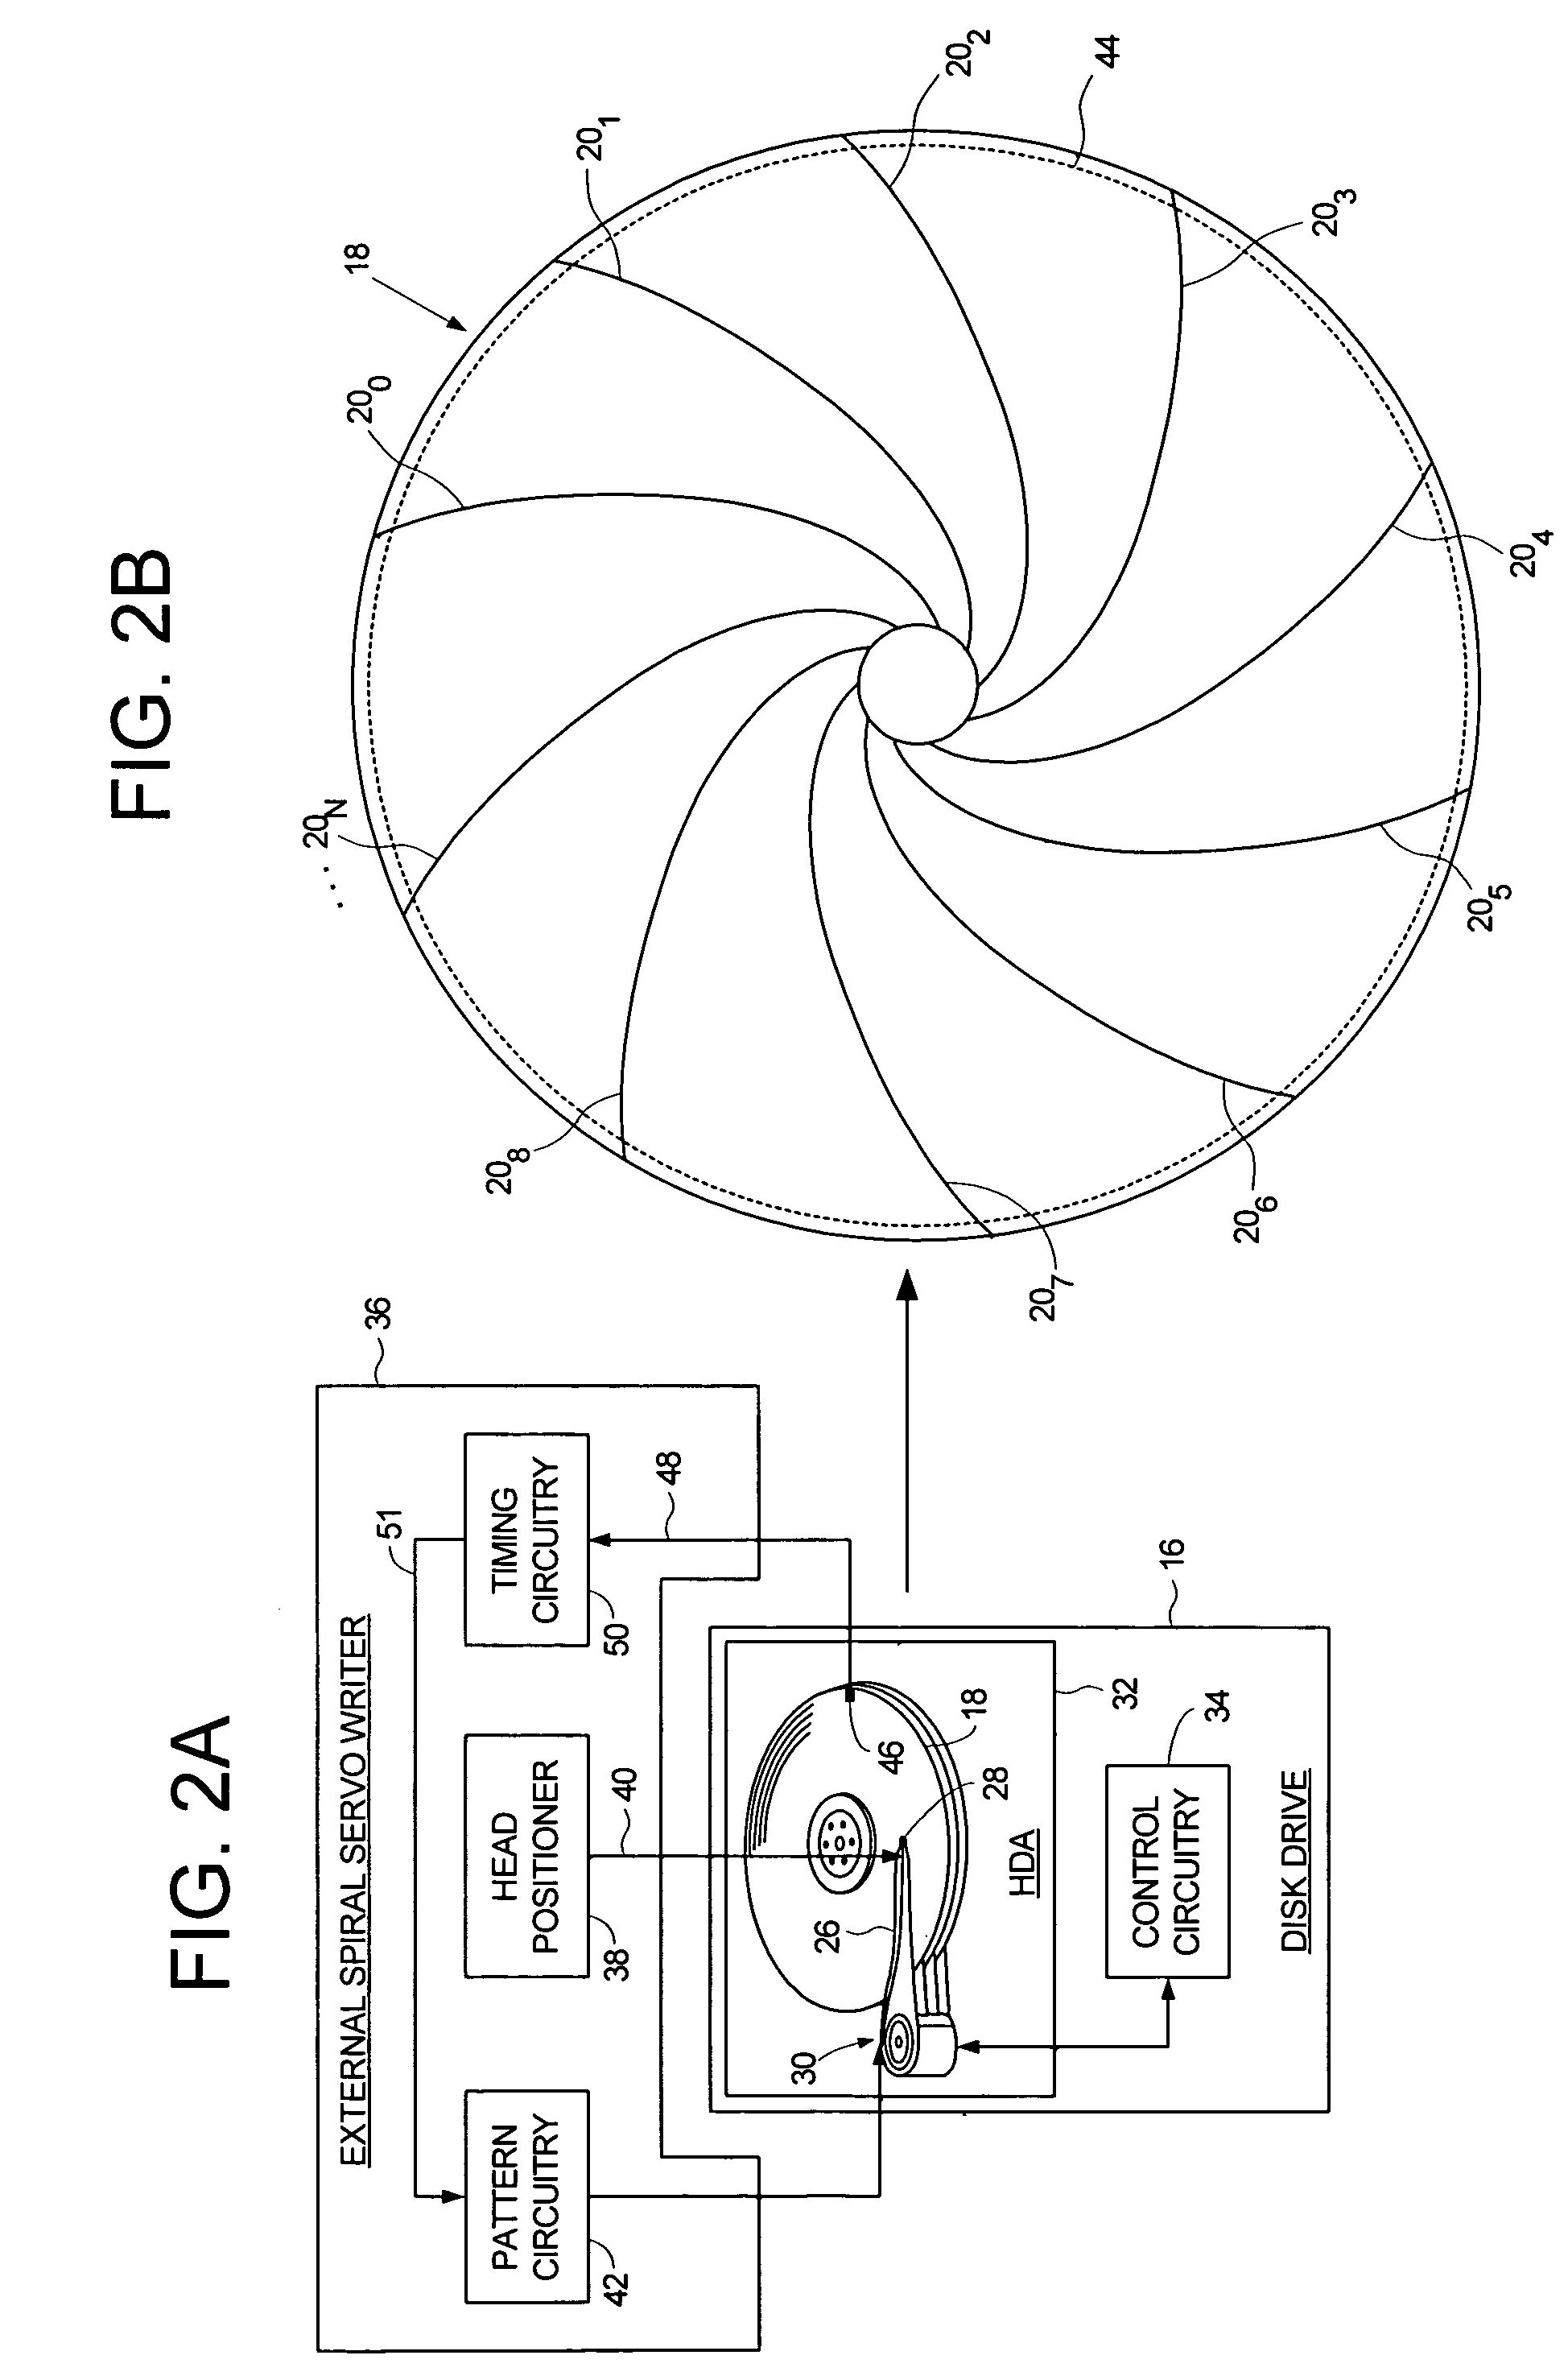 Adjusting track density over disk radius by changing slope of spiral tracks used to servo write a disk drive